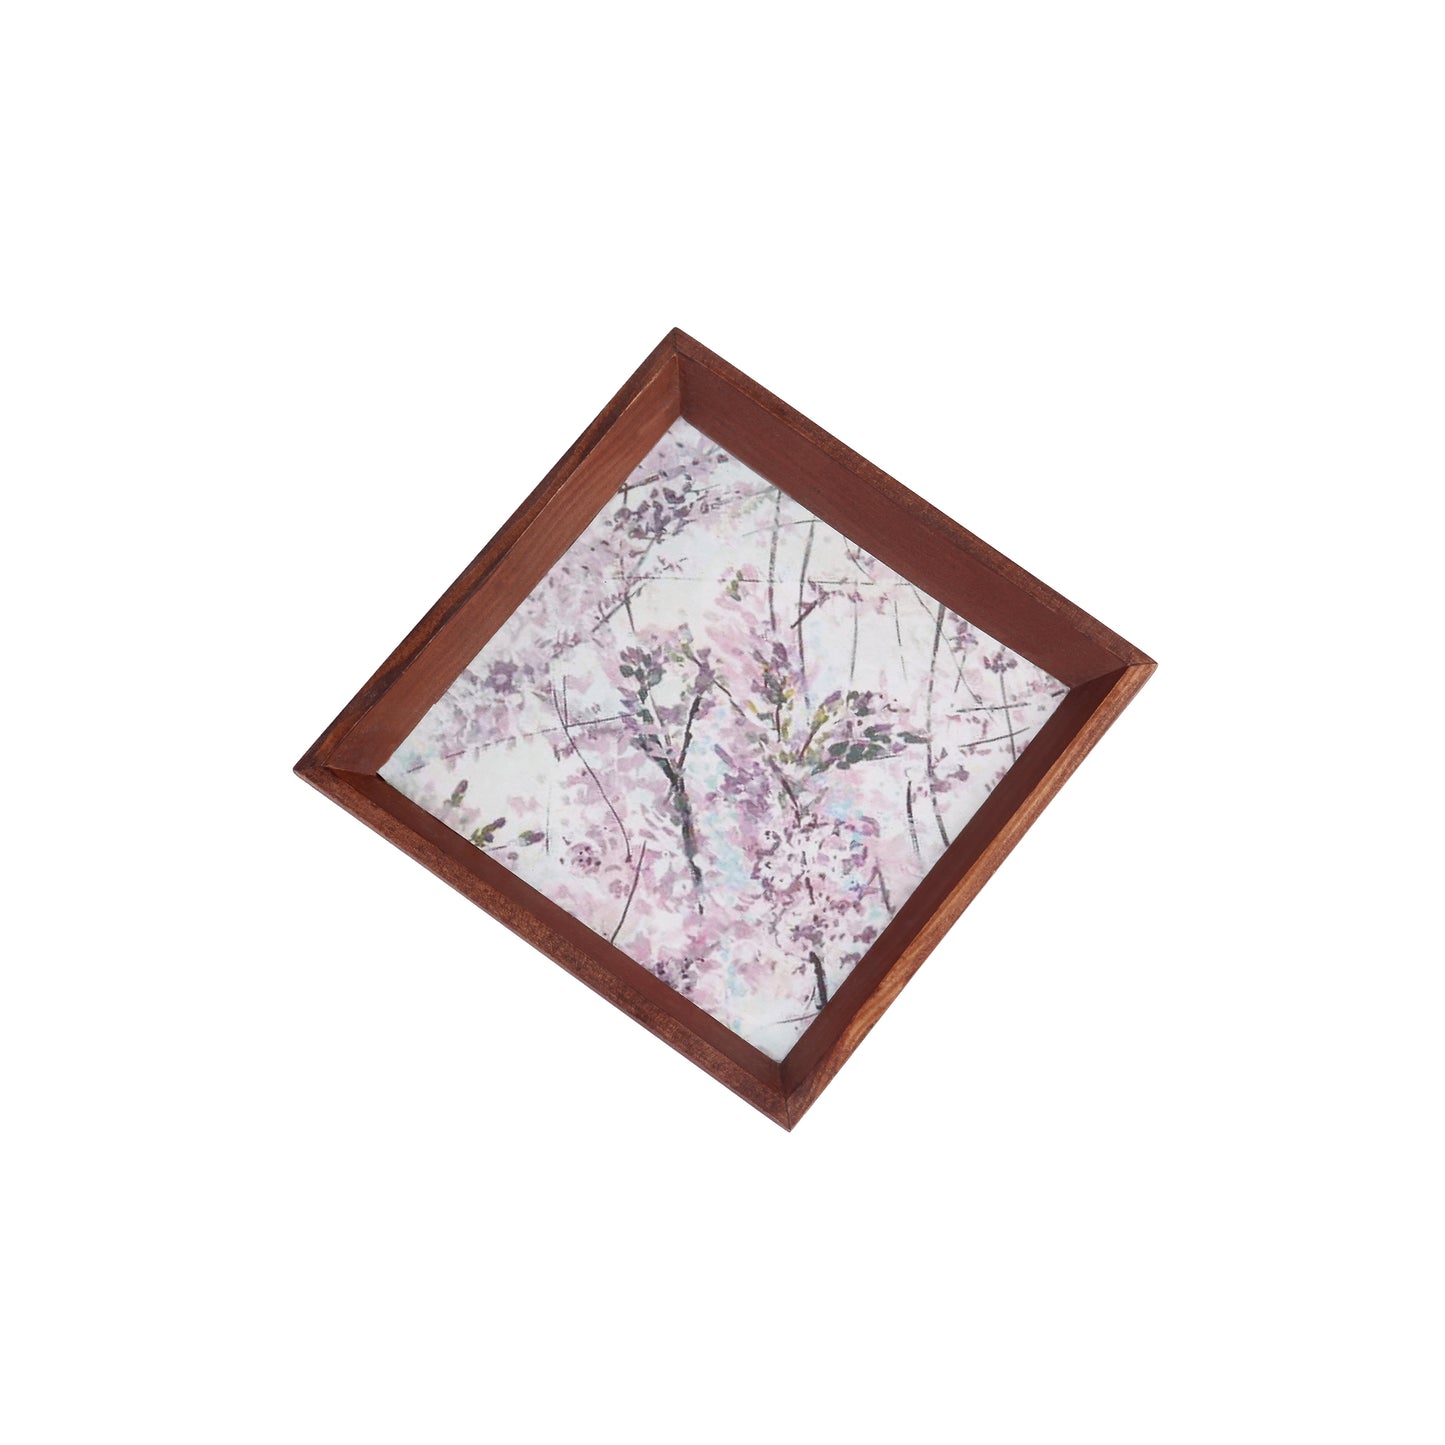 A Tiny Mistake Wisteria Small Square Wooden Serving Tray, 18 x 18 x 2 cm